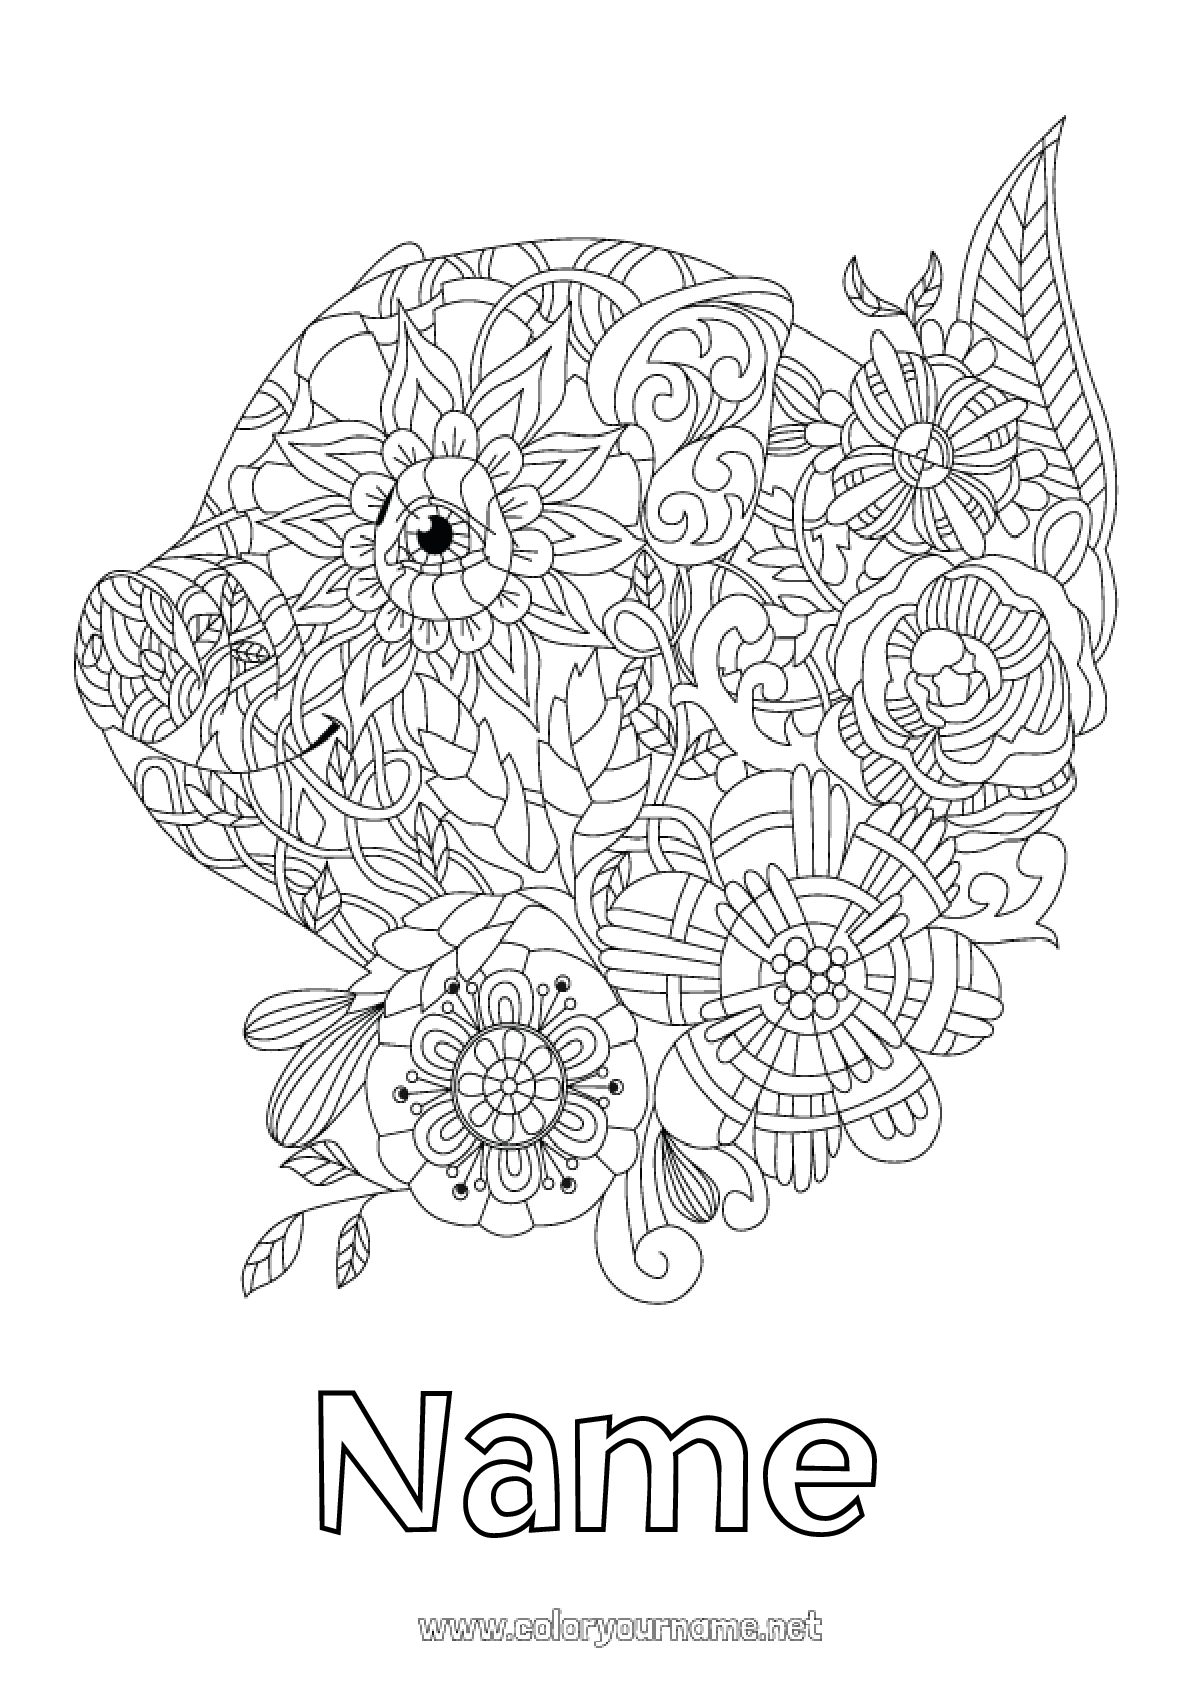 word world coloring pages piggy